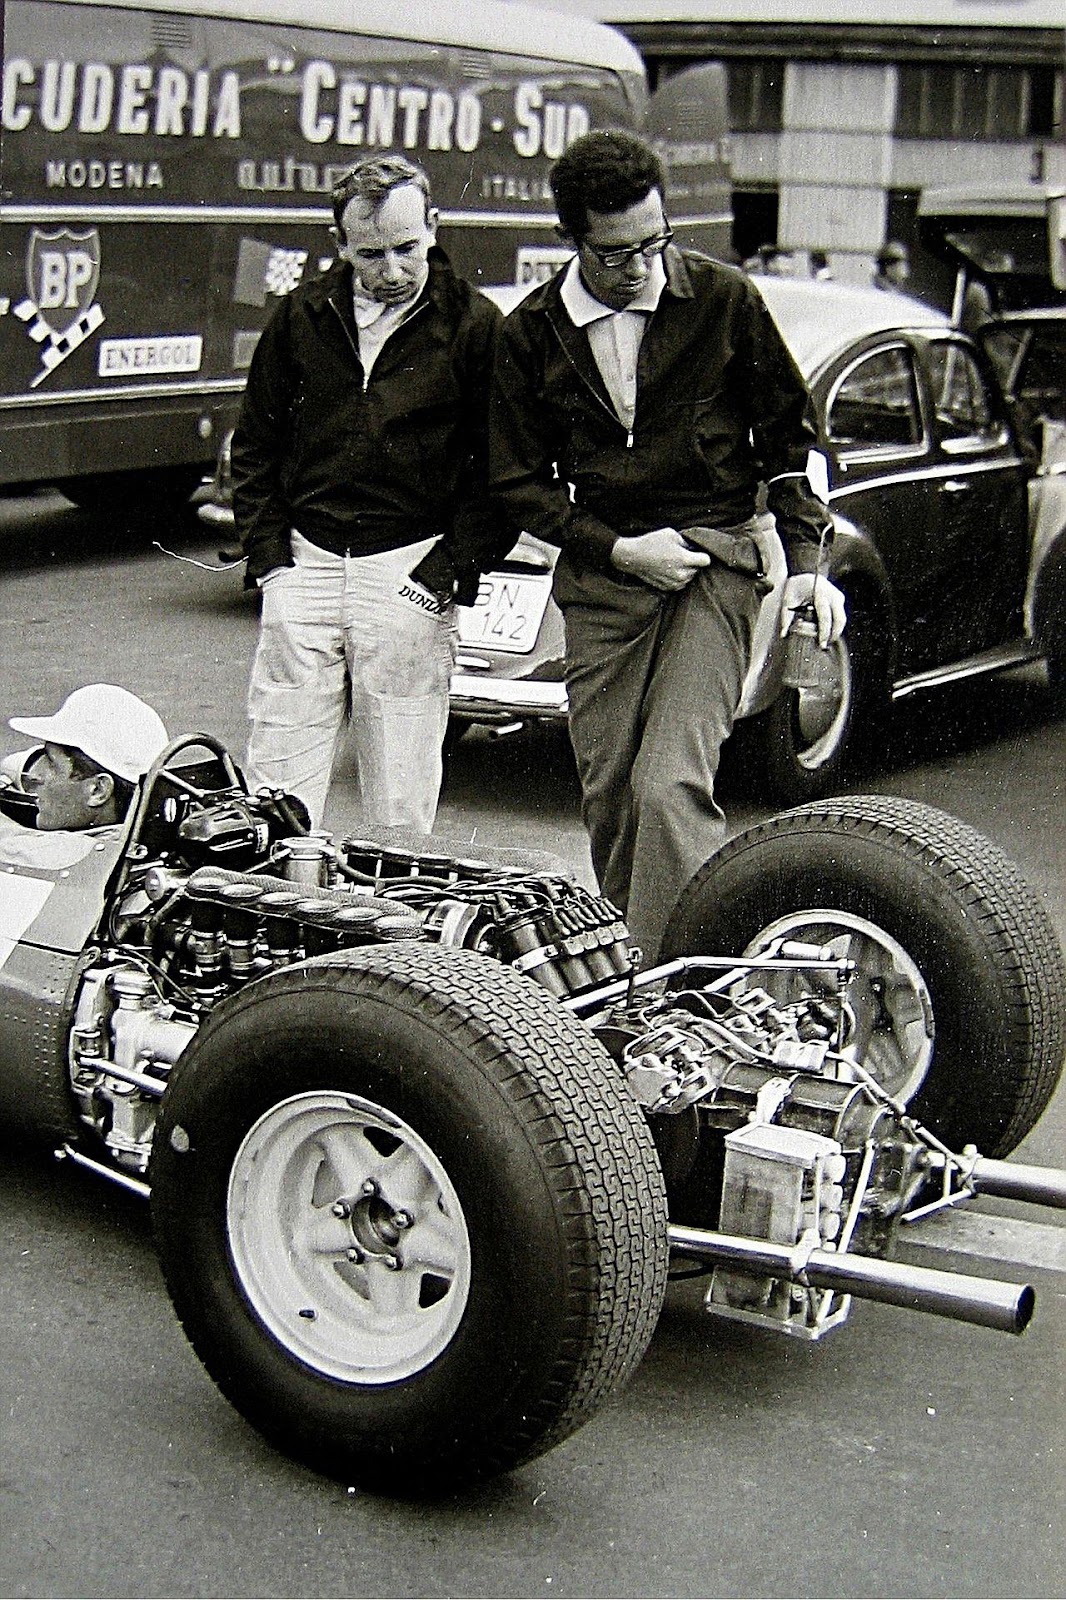 Forghieri (right) with John Surtees inspecting a Ferrari 1512 in 1965 at the Nürburgring.